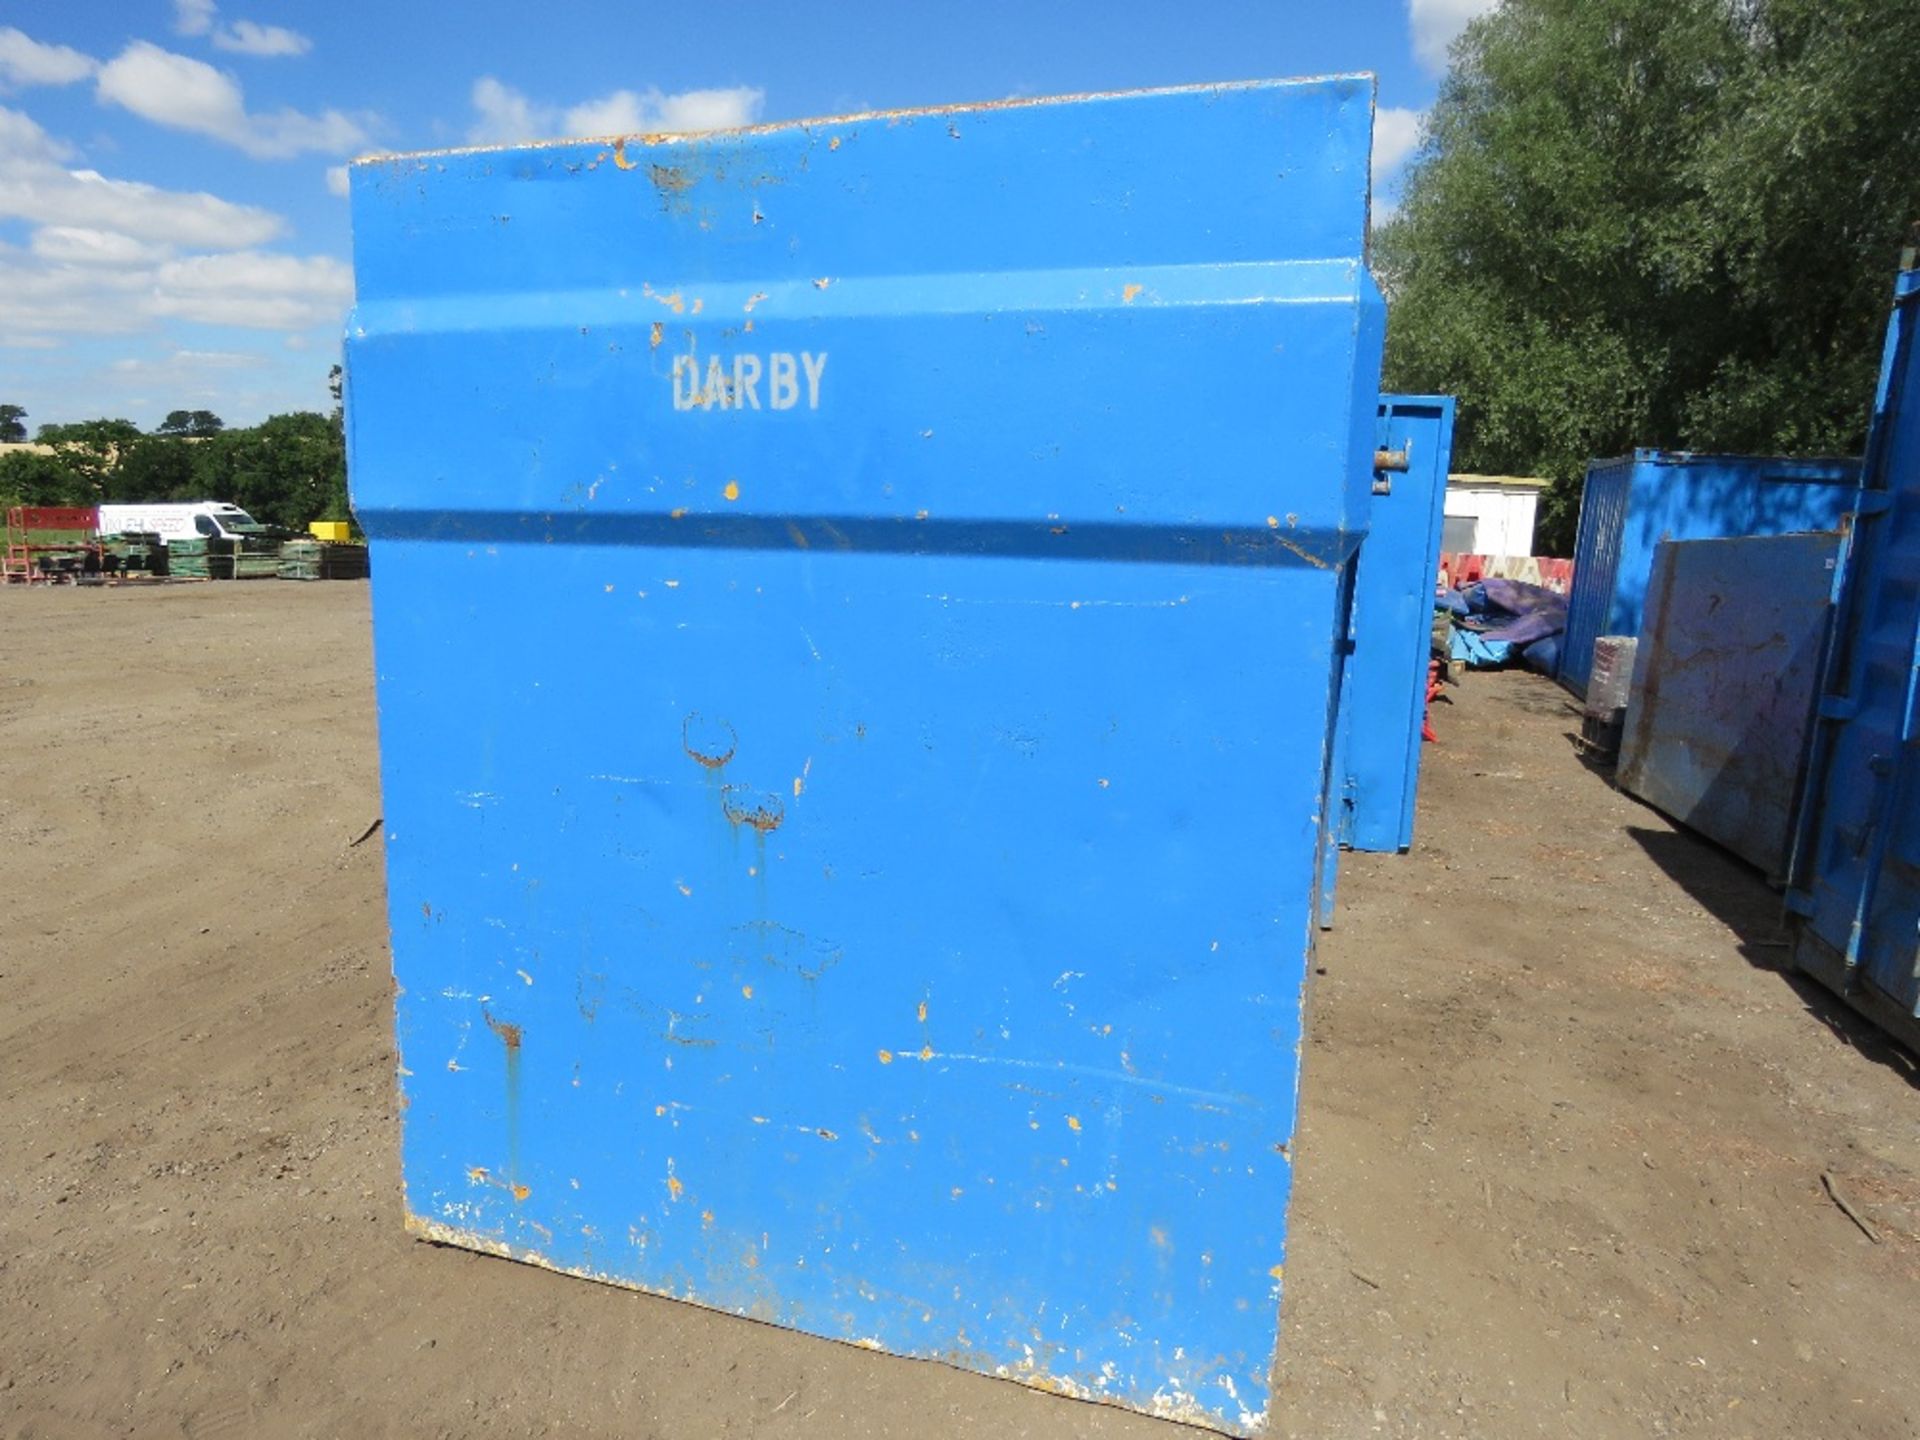 SKIP CHAIN LIFT ENCLOSED STEEL STORAGE CONTAINER 3M X 1.75M APPROX TS10 WITH KEYS. DIRECT FROM - Image 3 of 6